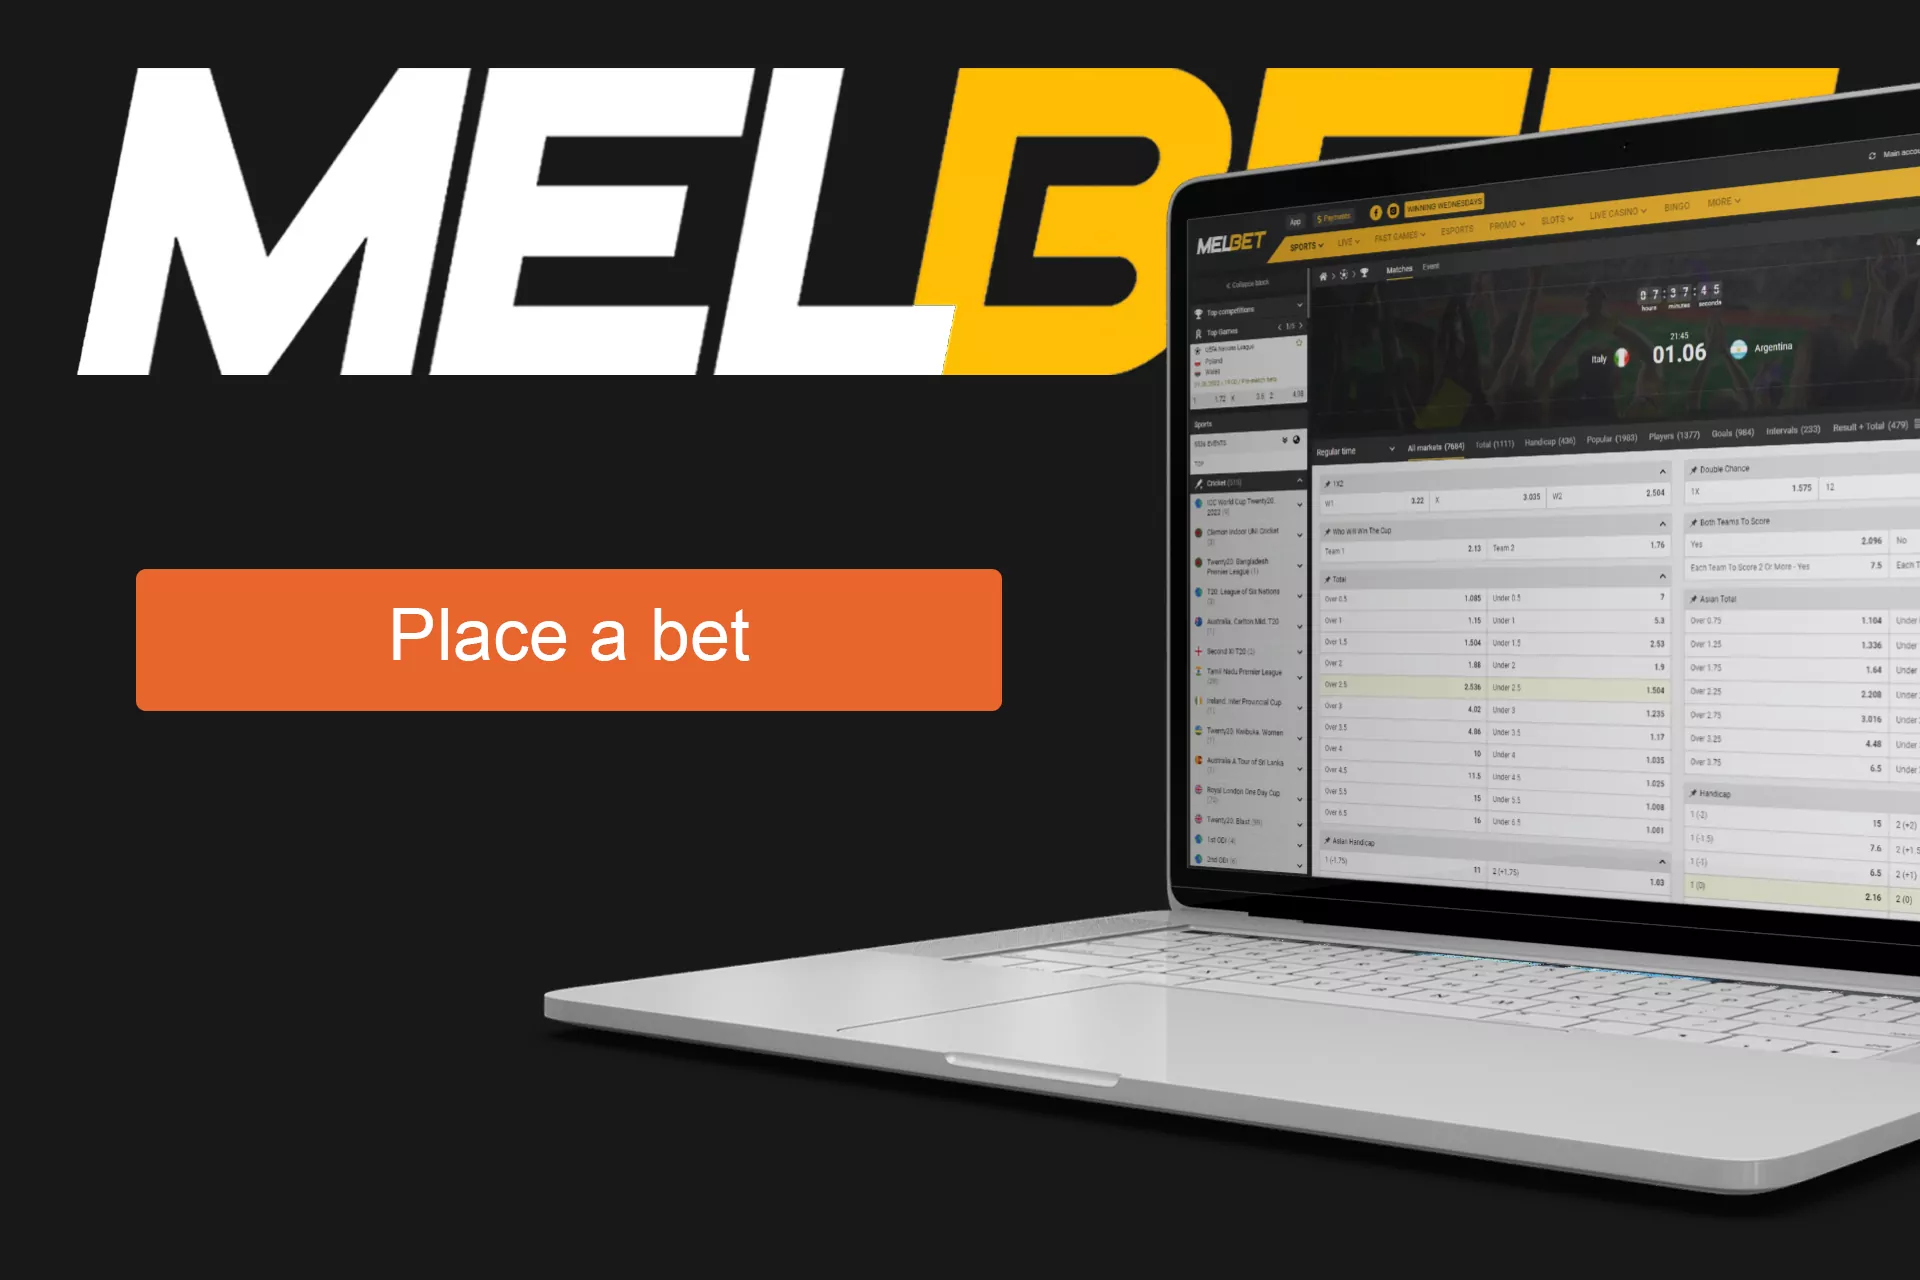 Users can also place a combo bet on an event.